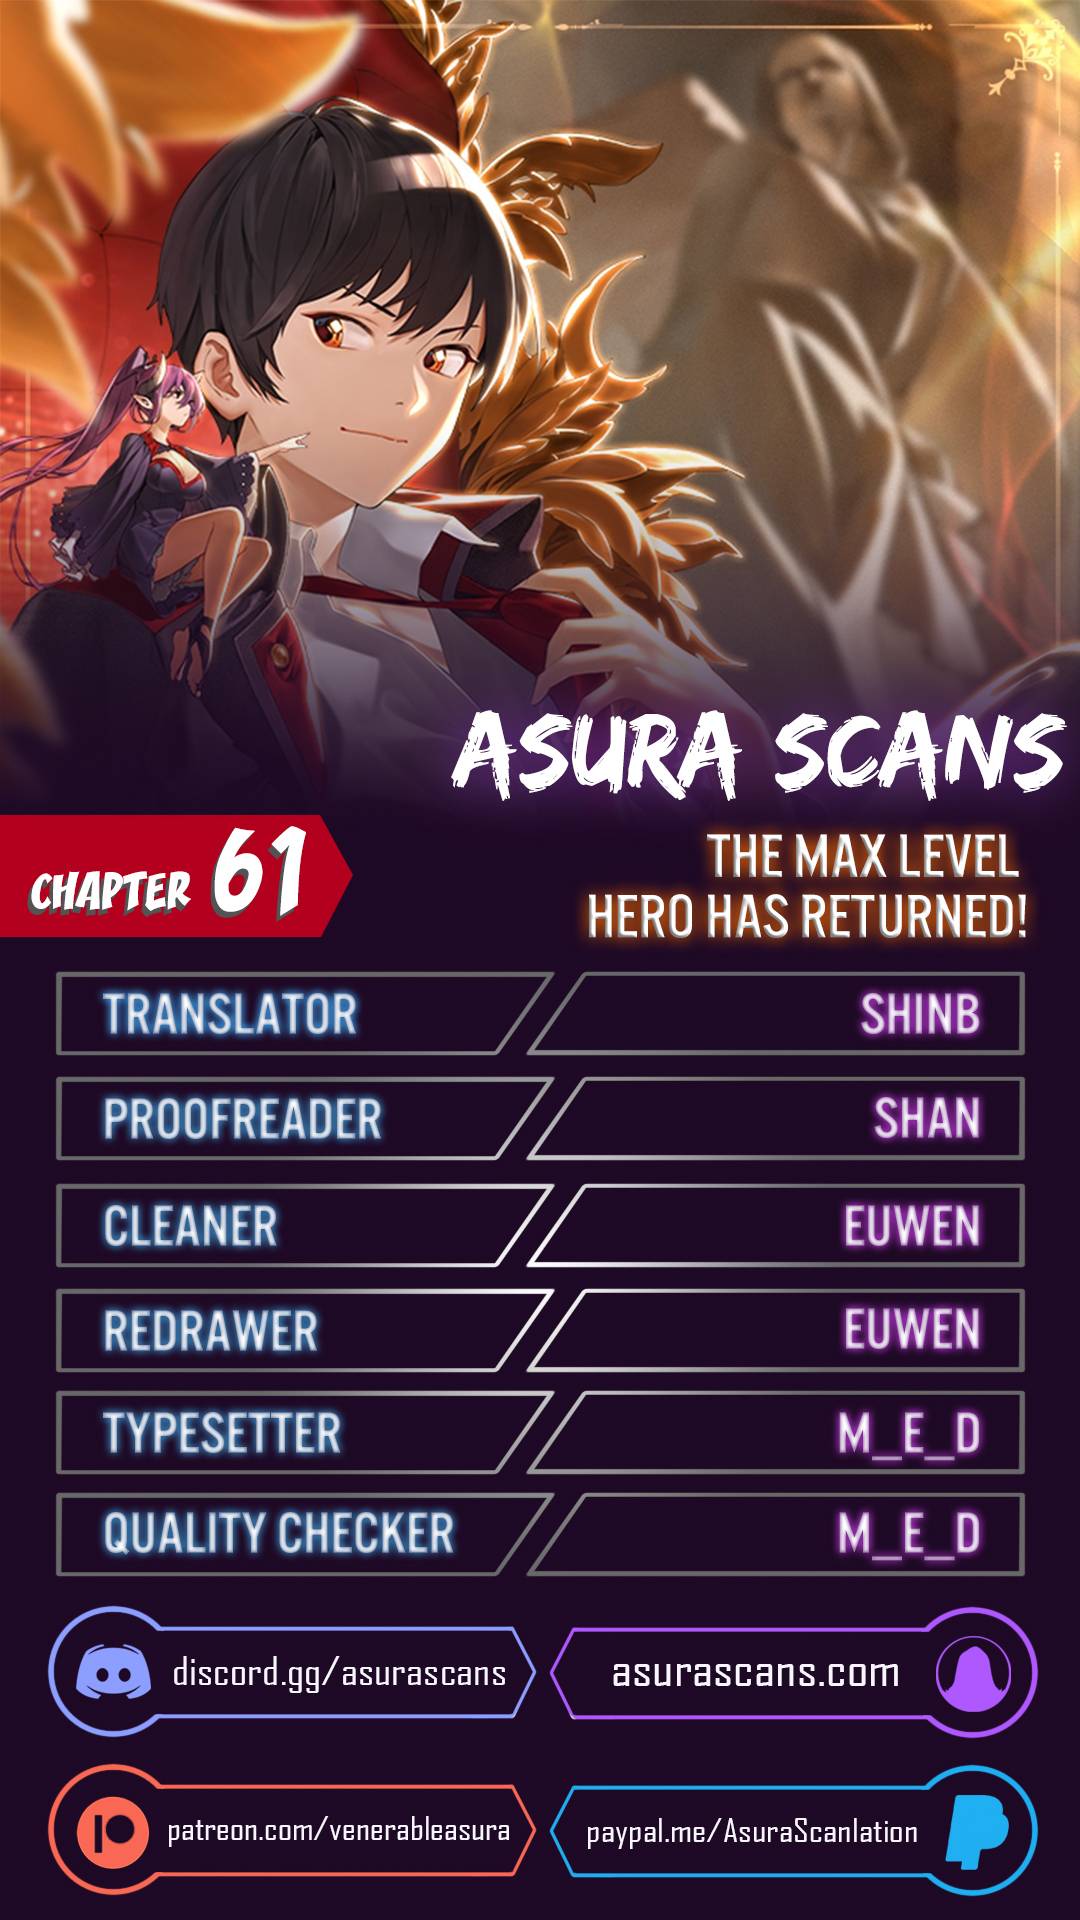 The MAX leveled hero will return! Chapter 61